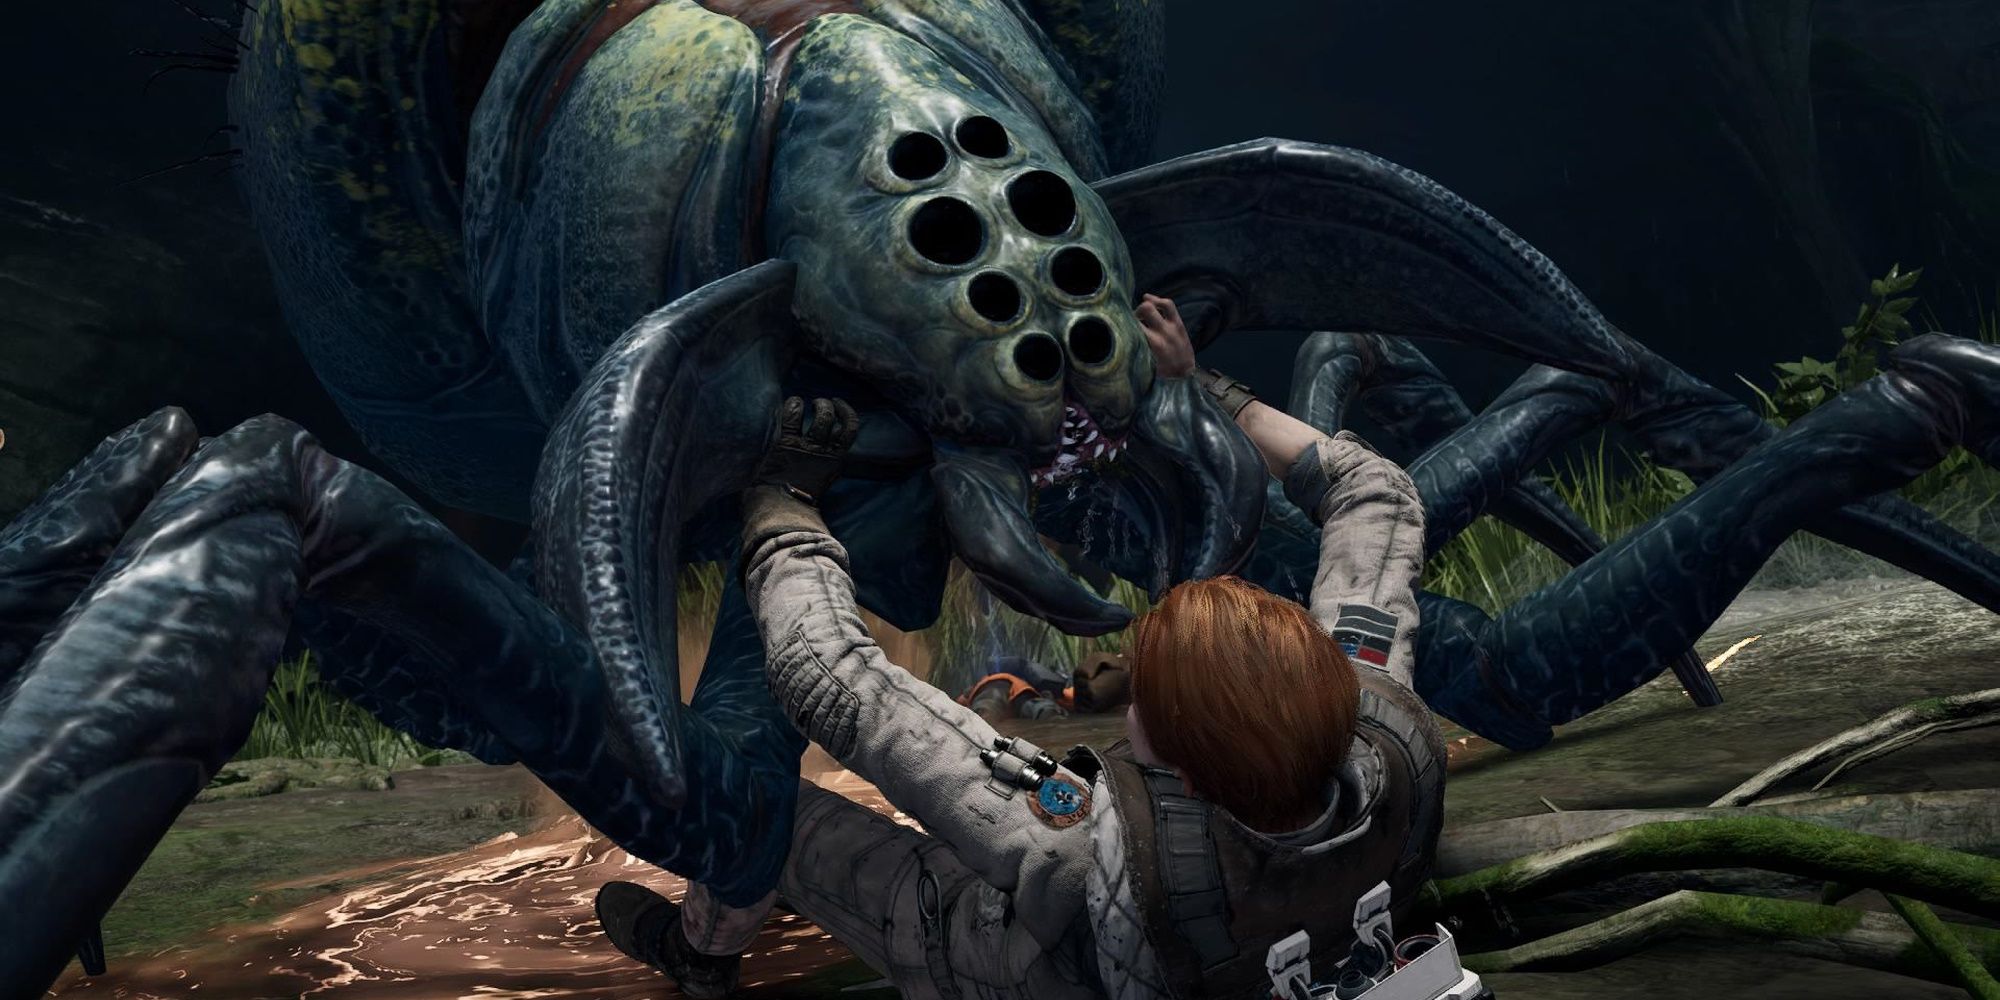 Star Wars Jedi: Survivor Will Support Those With A Fear Of Spiders